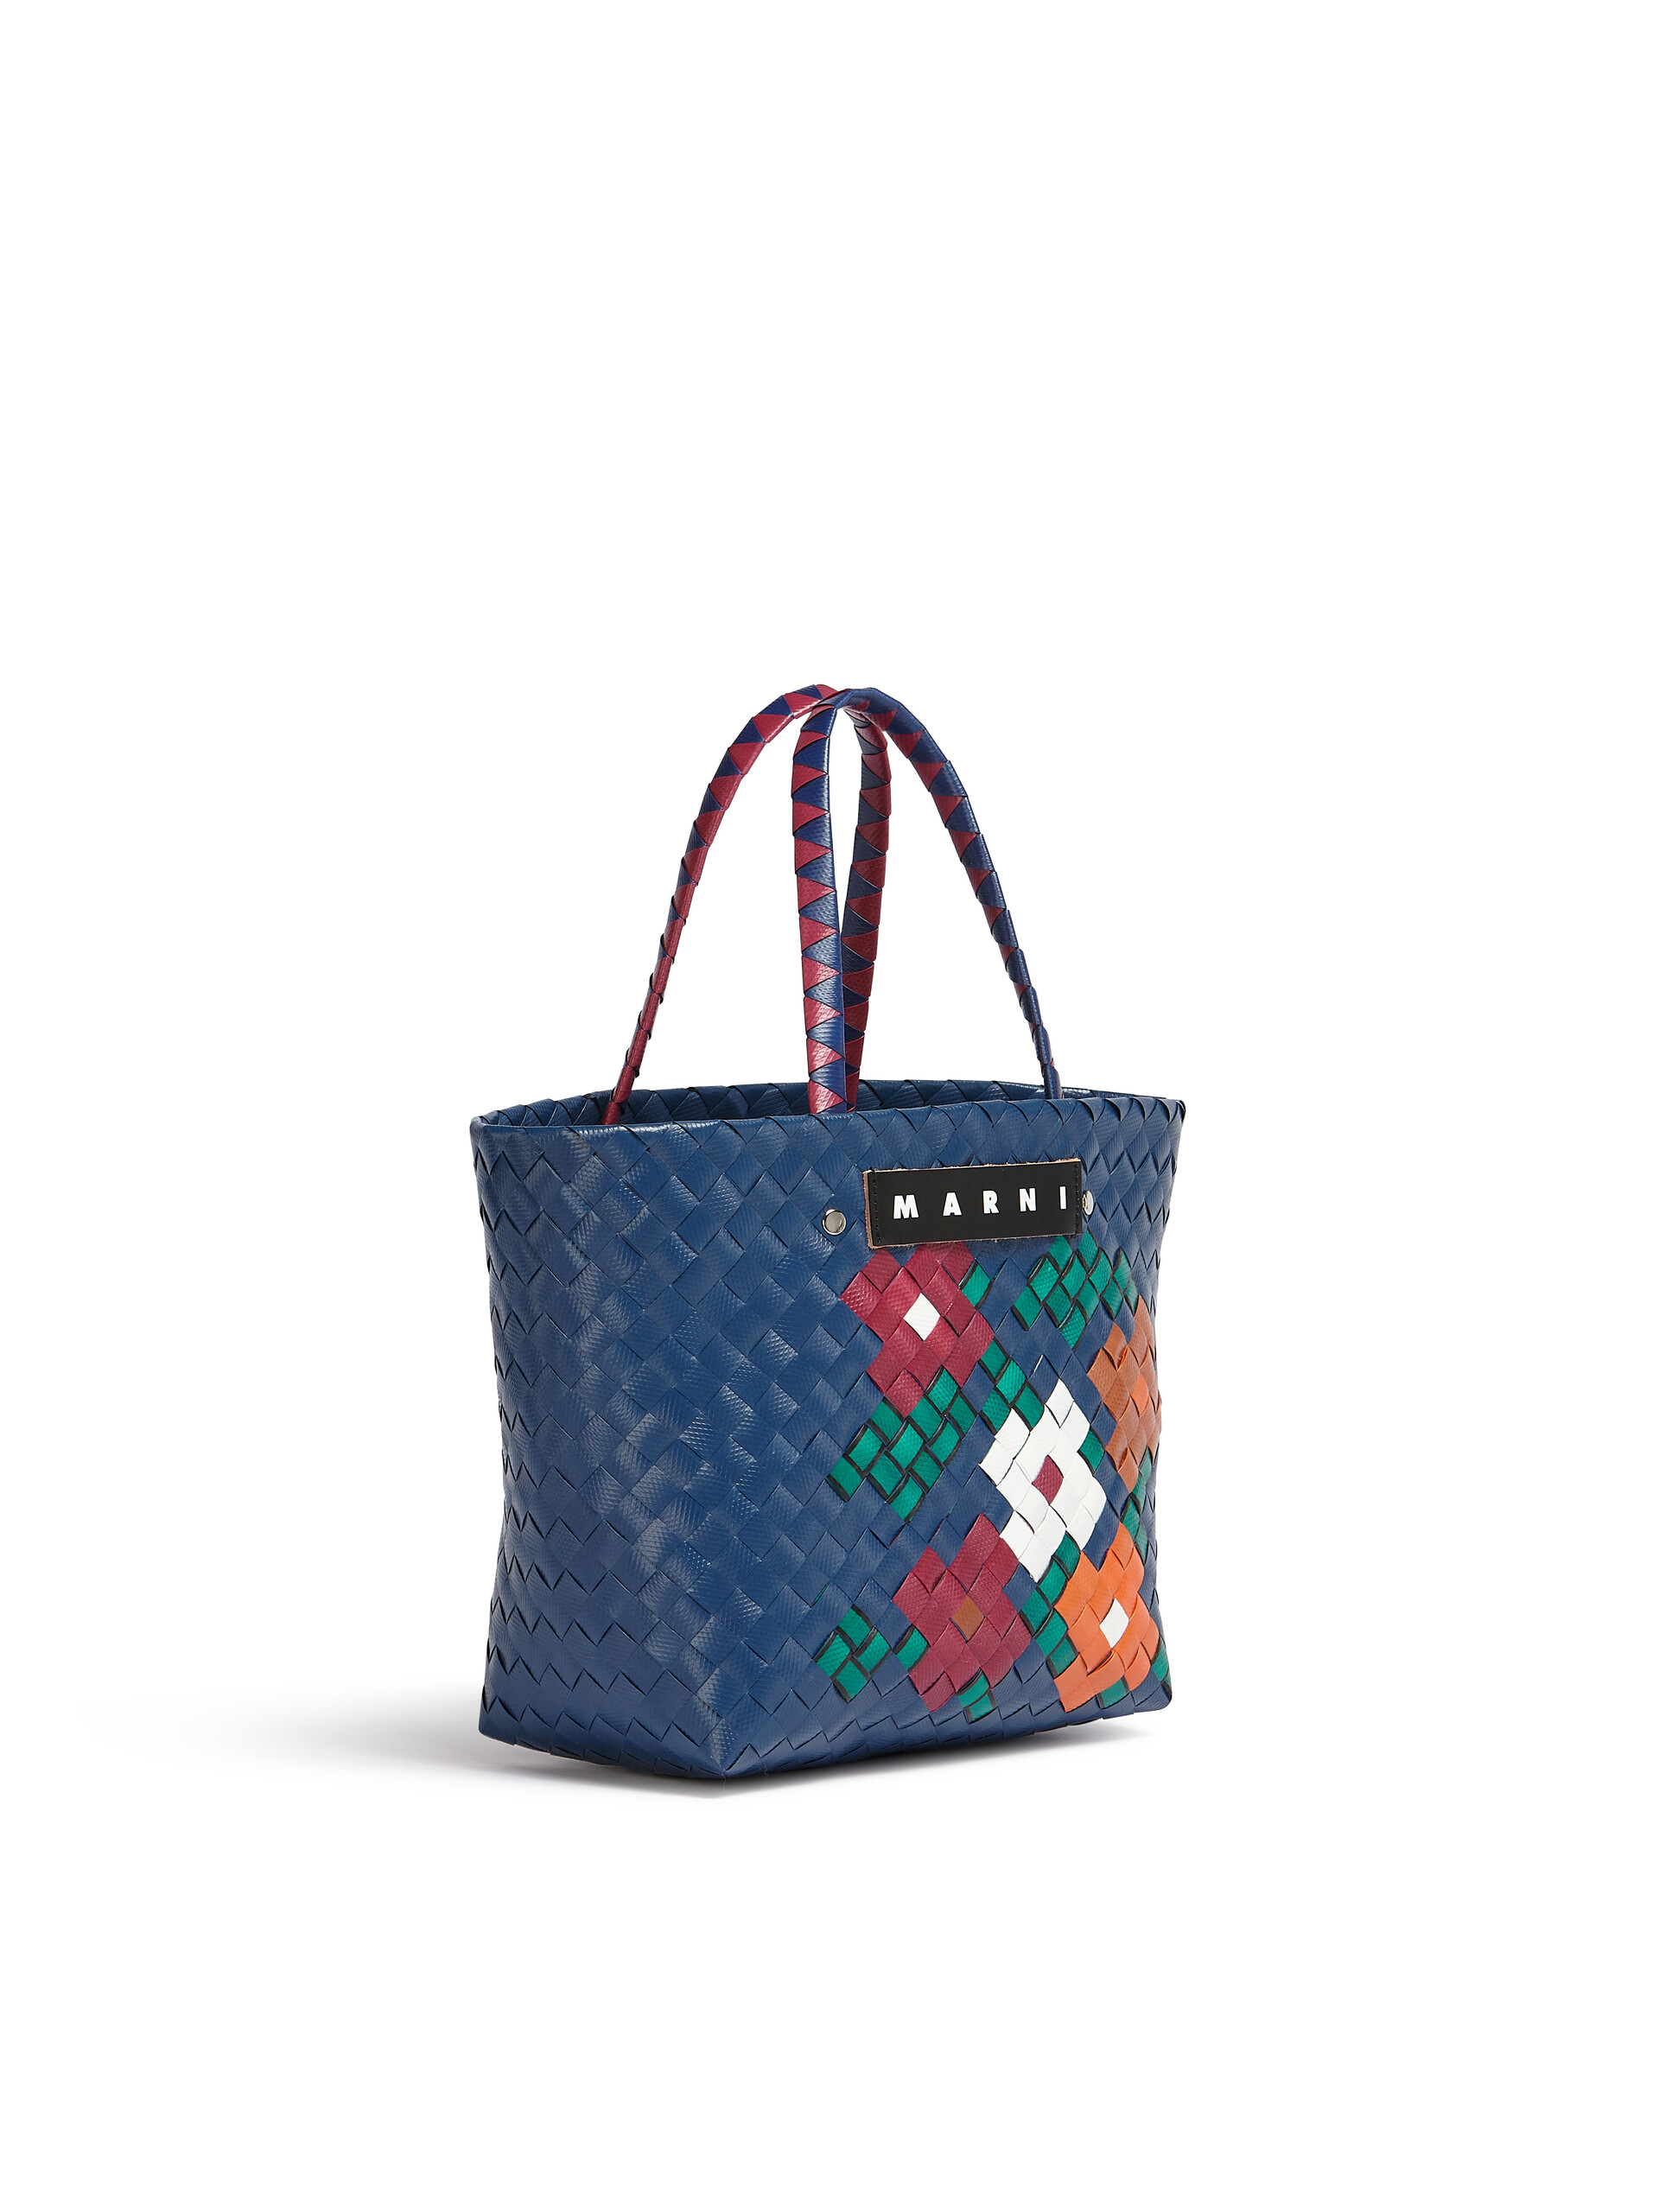 MARNI MARKET small bag in blue flower motif - Bags - Image 2